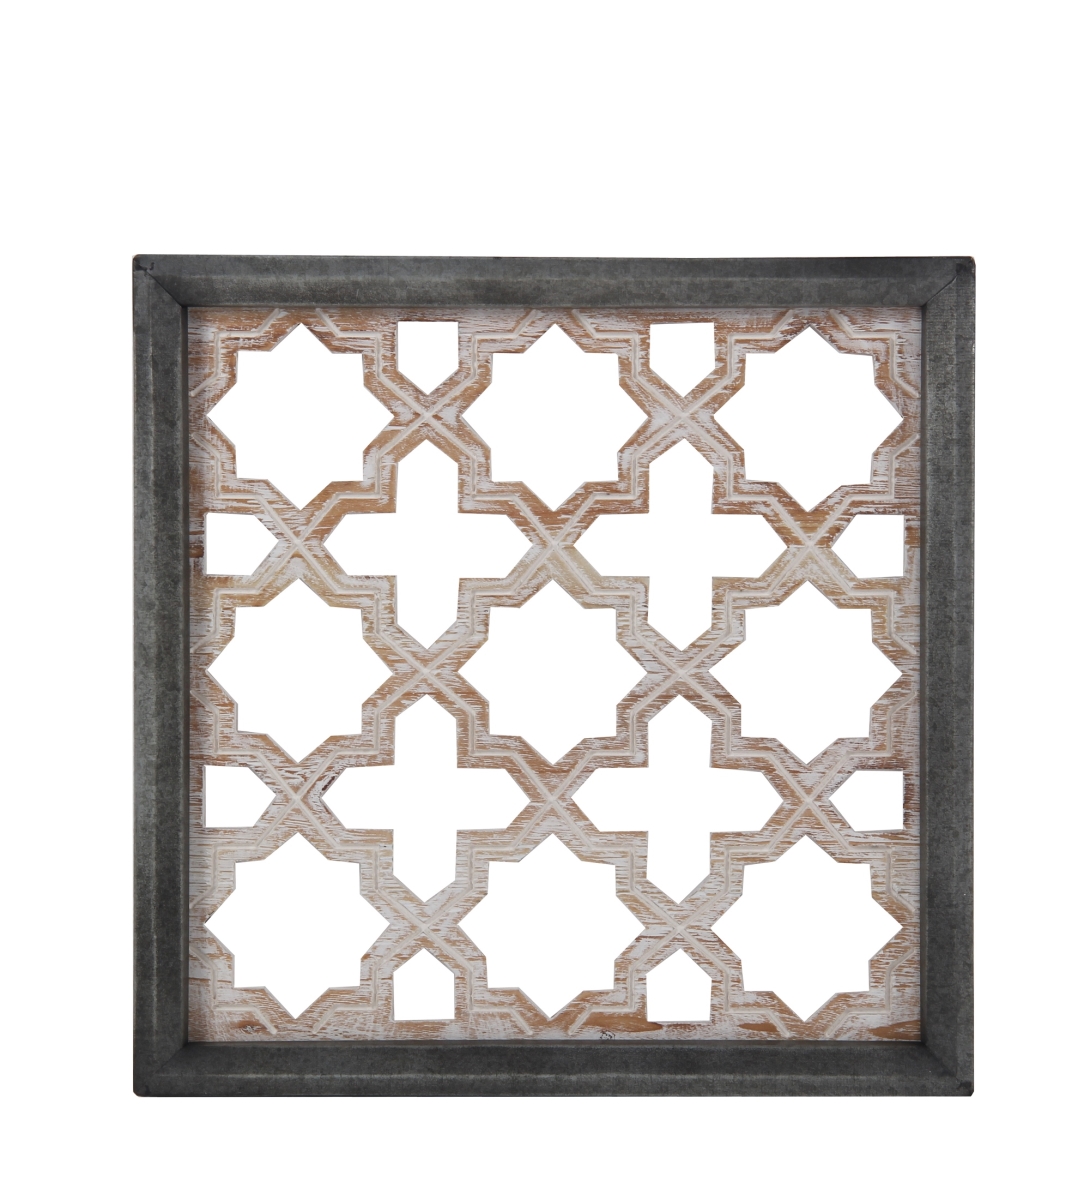 16104 17 X 10.5 X 17.5 In. Transitional Wood Wall Decor